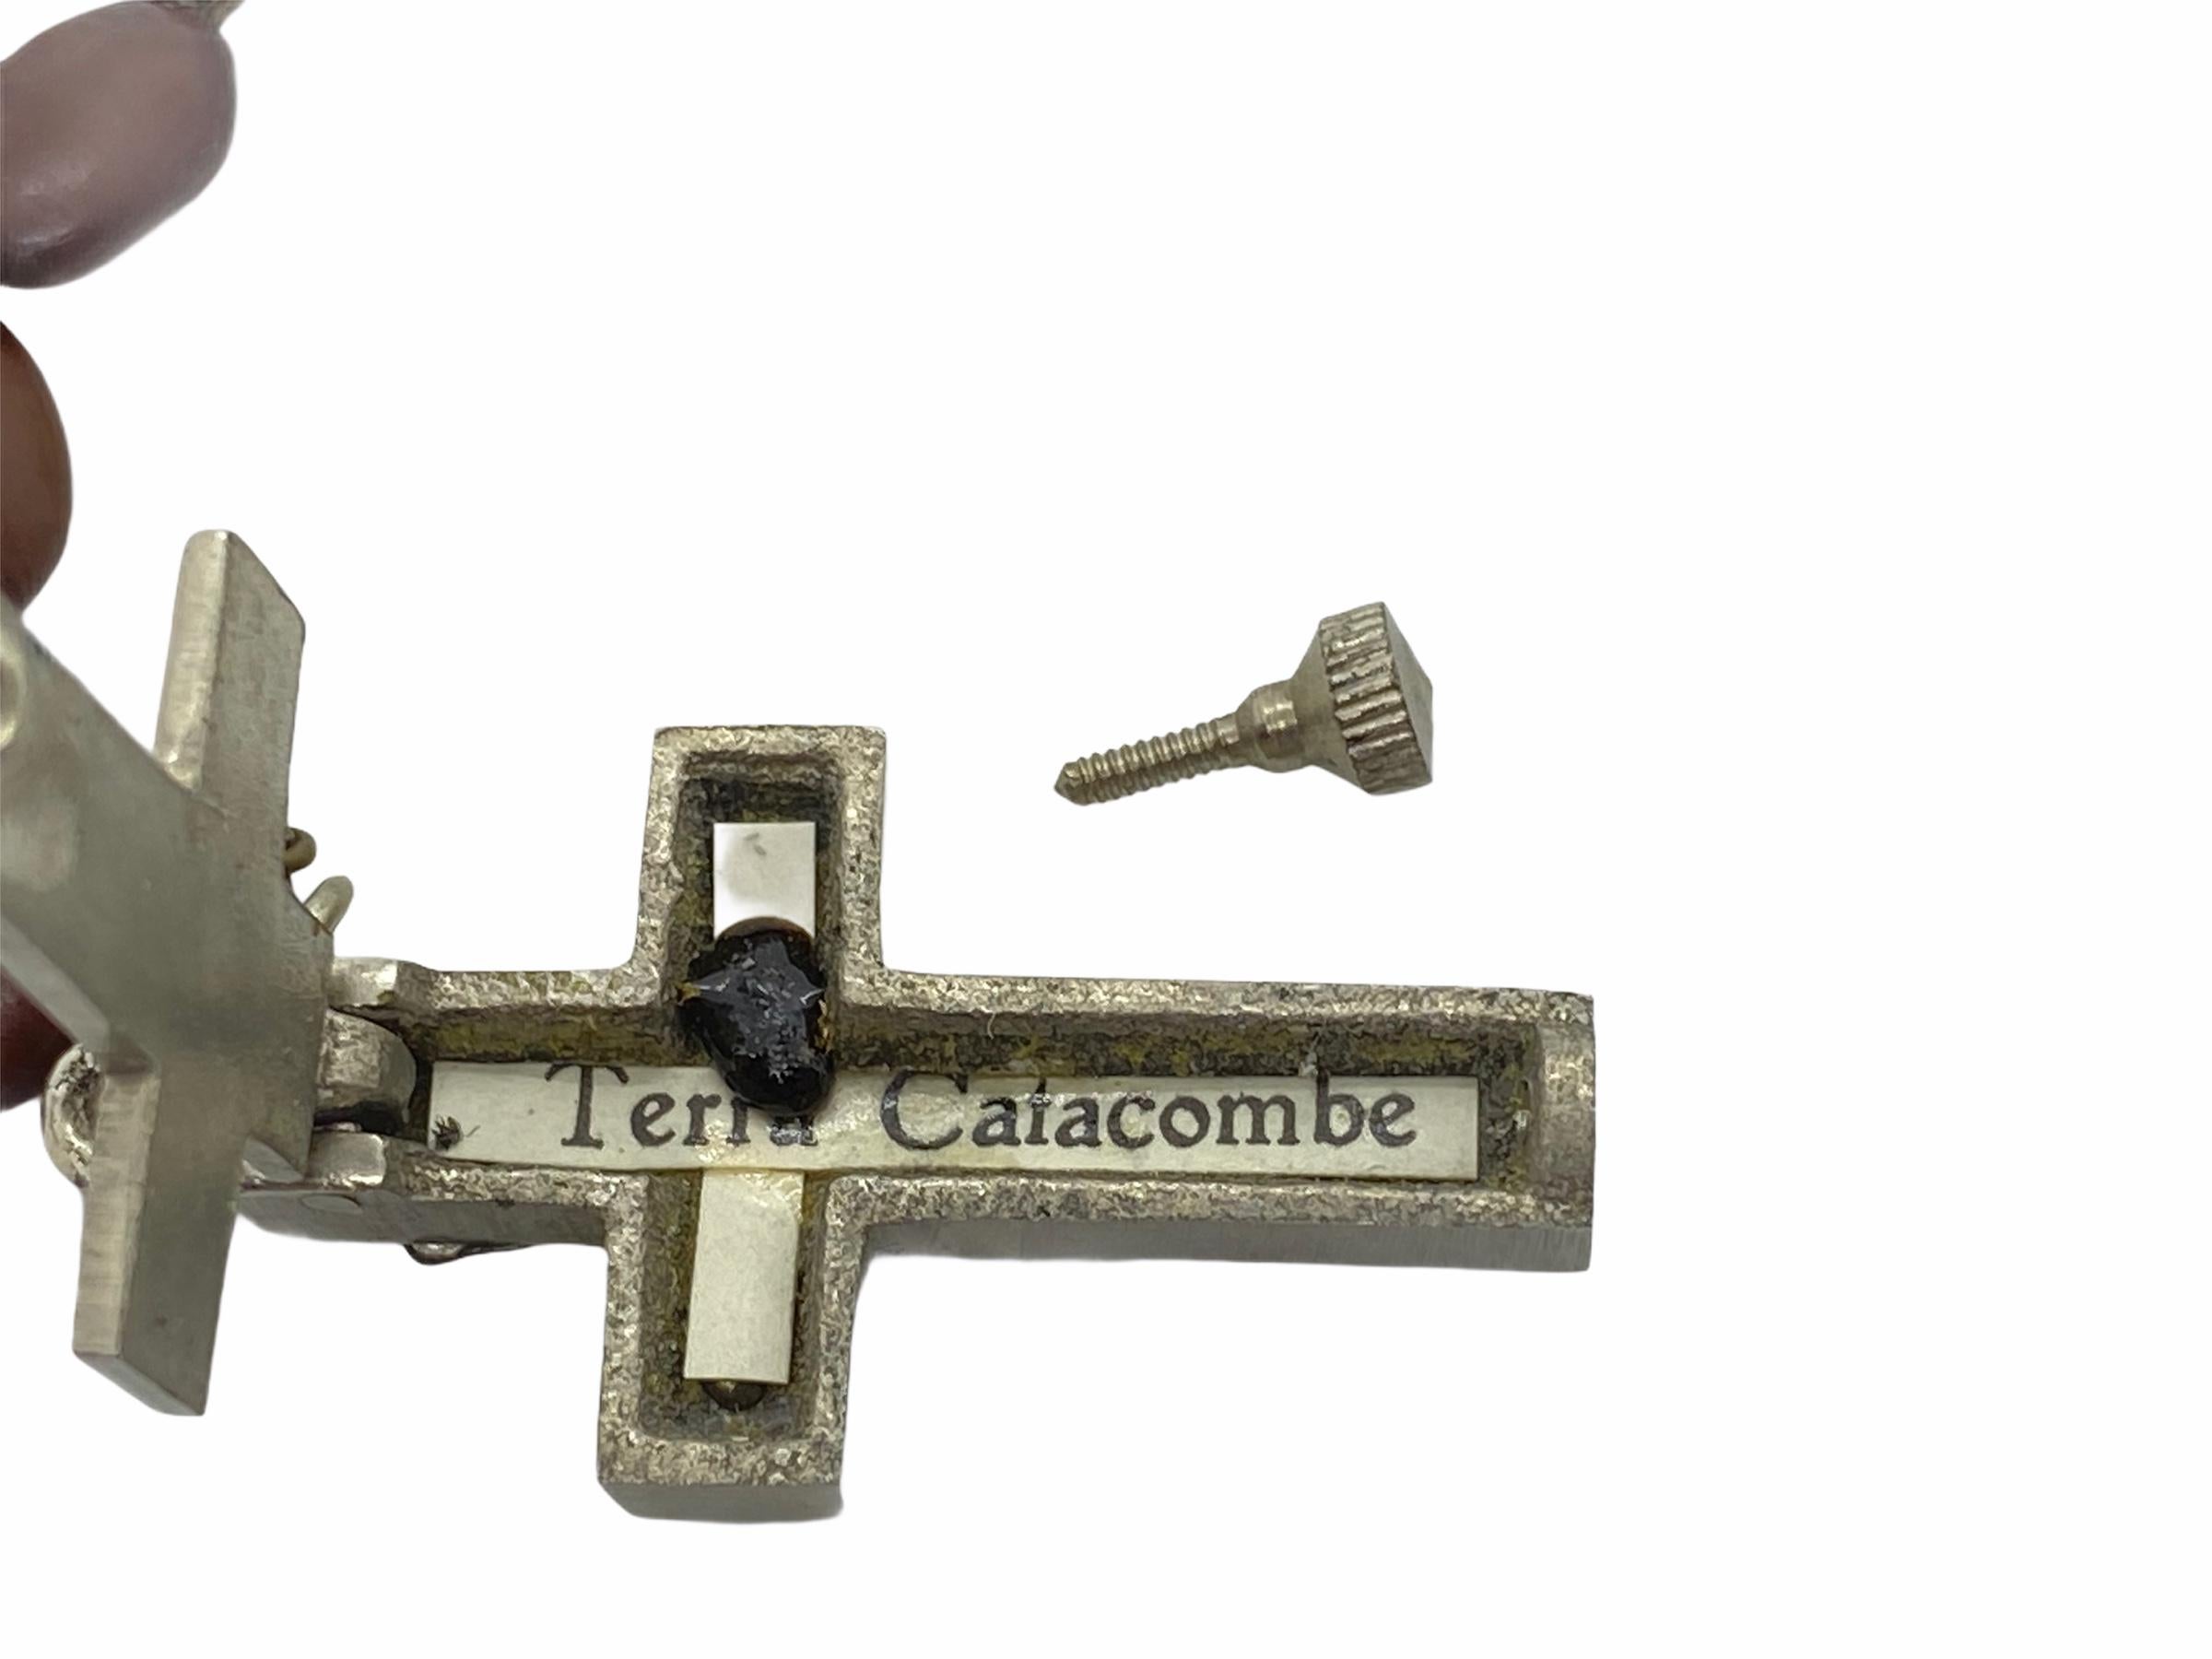 Mid-20th Century Vintage Catholic Reliquary Box Crucifix Pendant with Relics of Catacombs of Rome